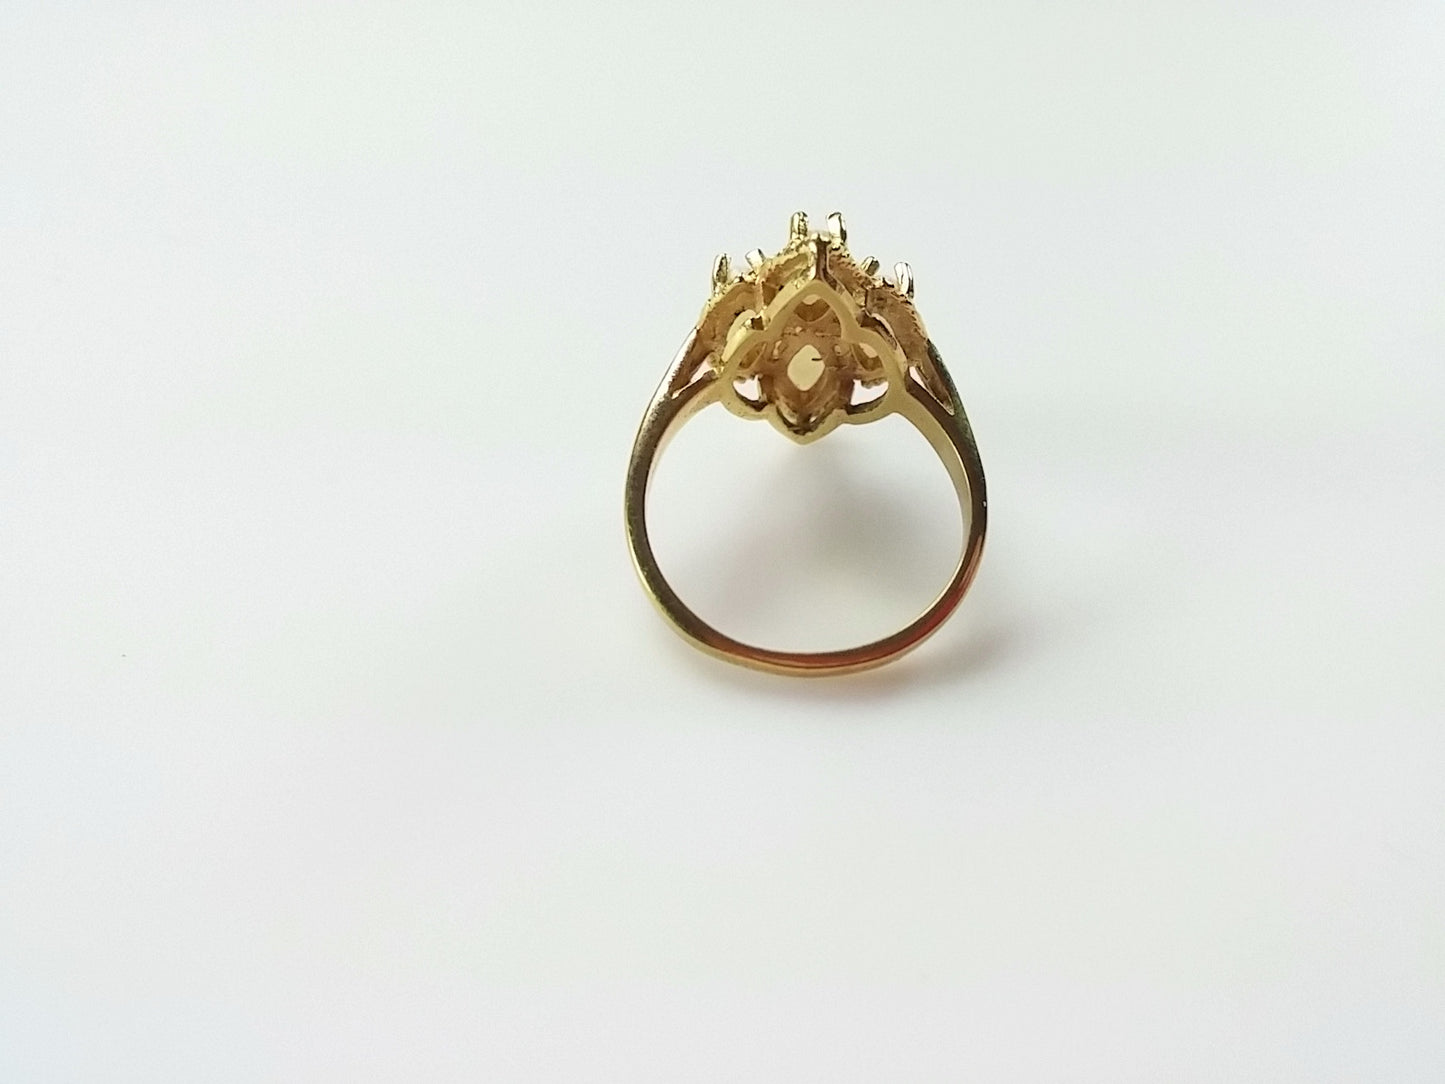 Vintage Ring 18KT HGE Gold Tone w/ White Stone Center Setting - Dirty 30 Vintage | Vintage Clothing, Vintage Jewelry, Vintage Accessories